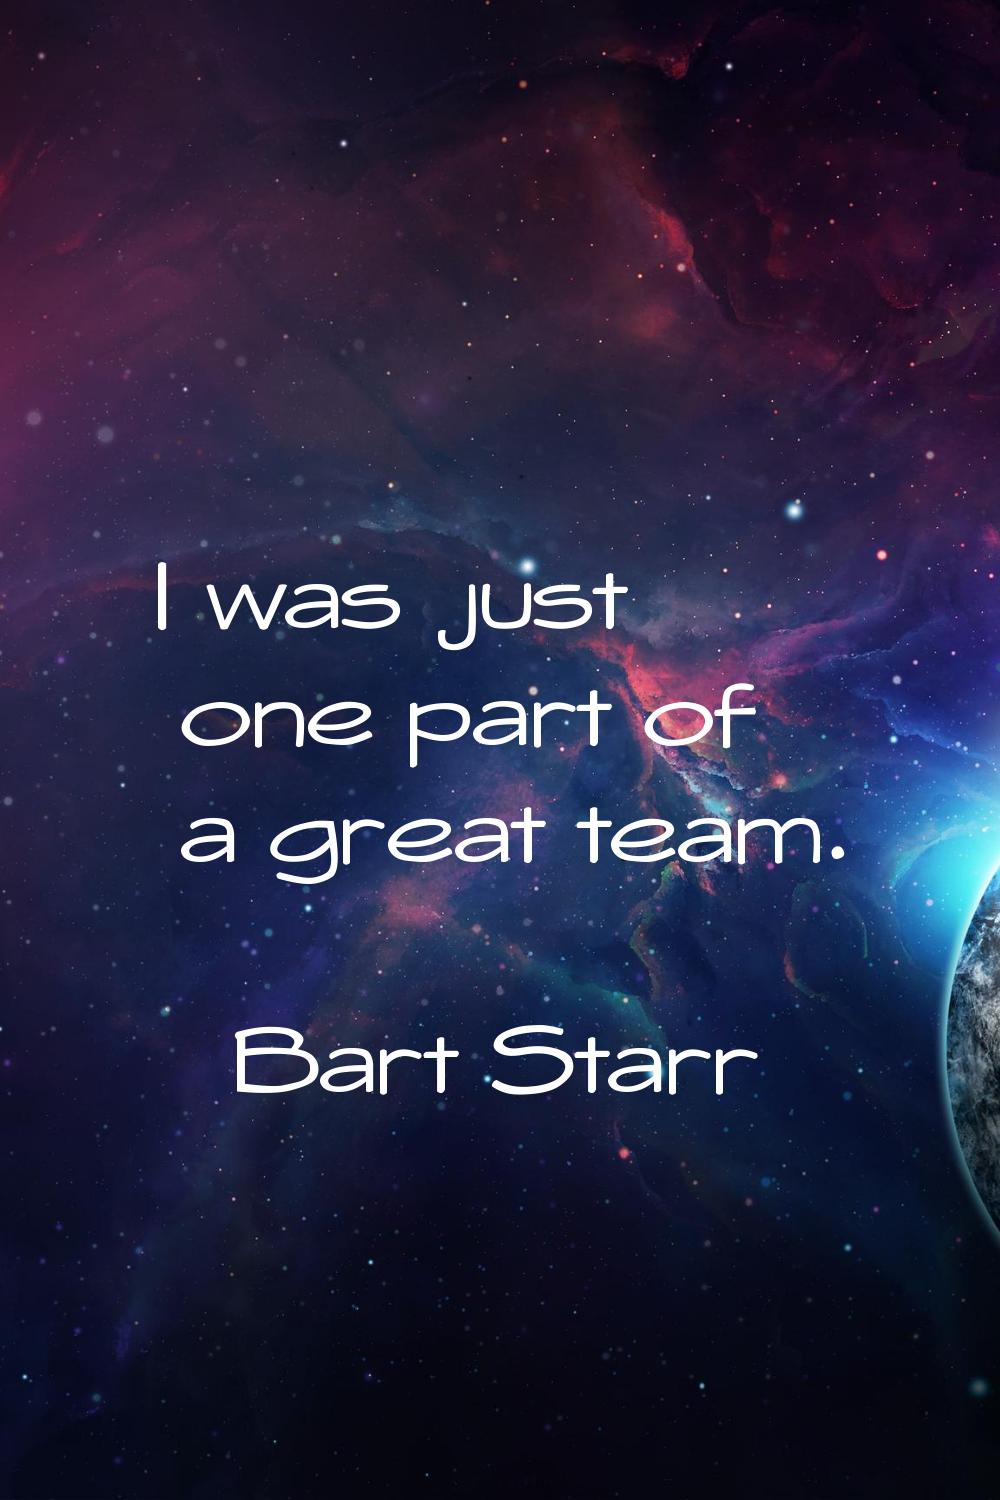 I was just one part of a great team.